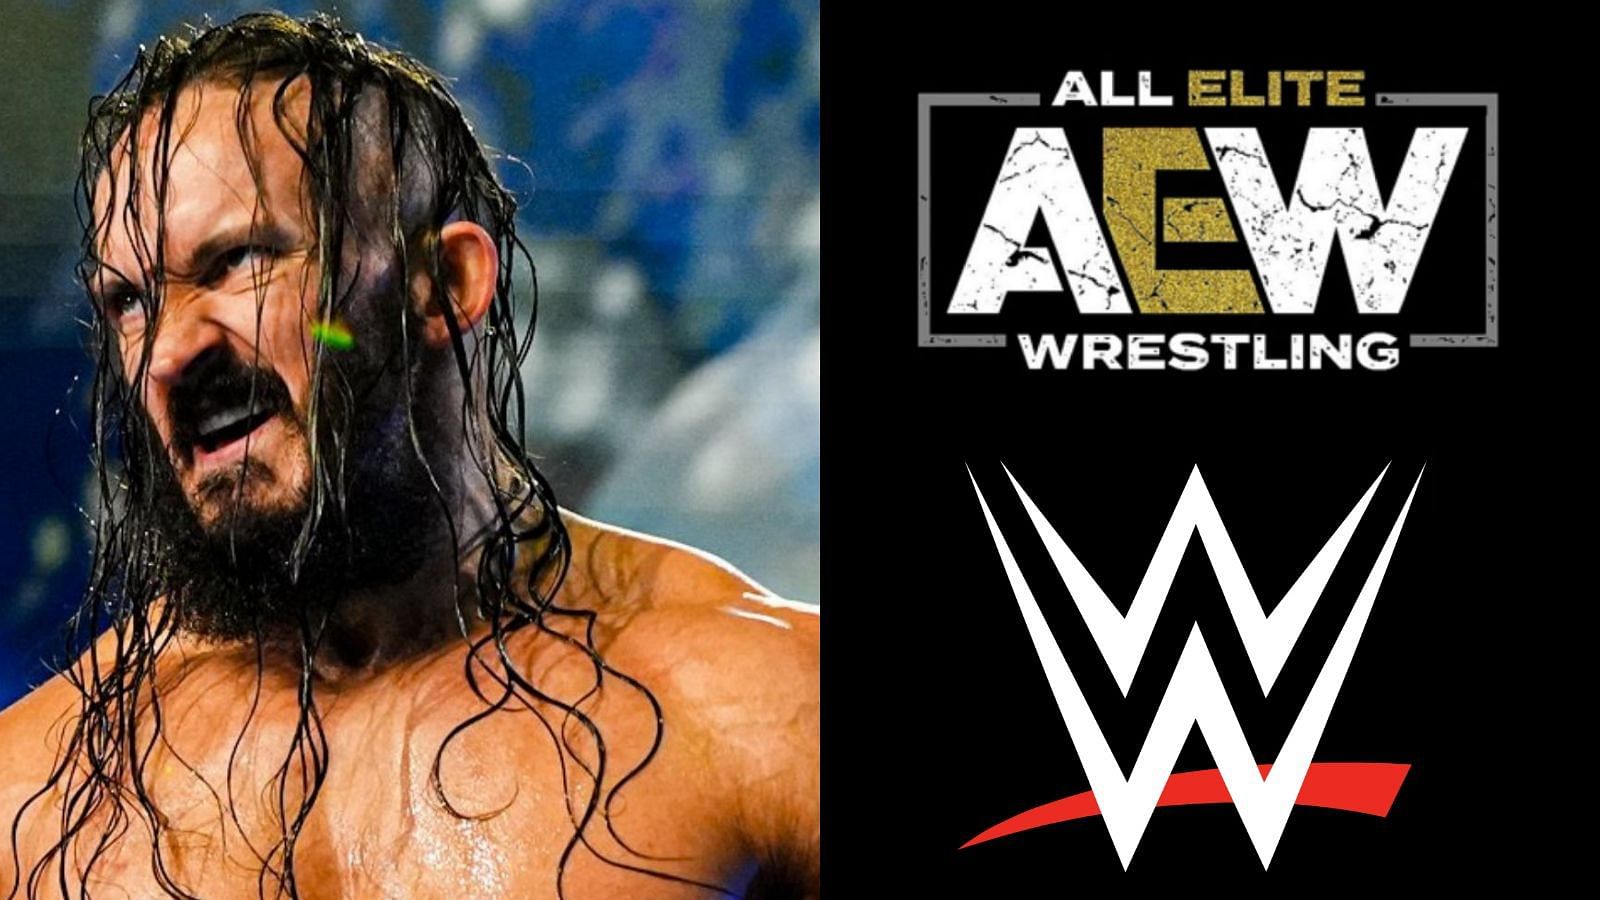 PAC has quickly become a fighting champion, with yet another defense on AEW DARK!